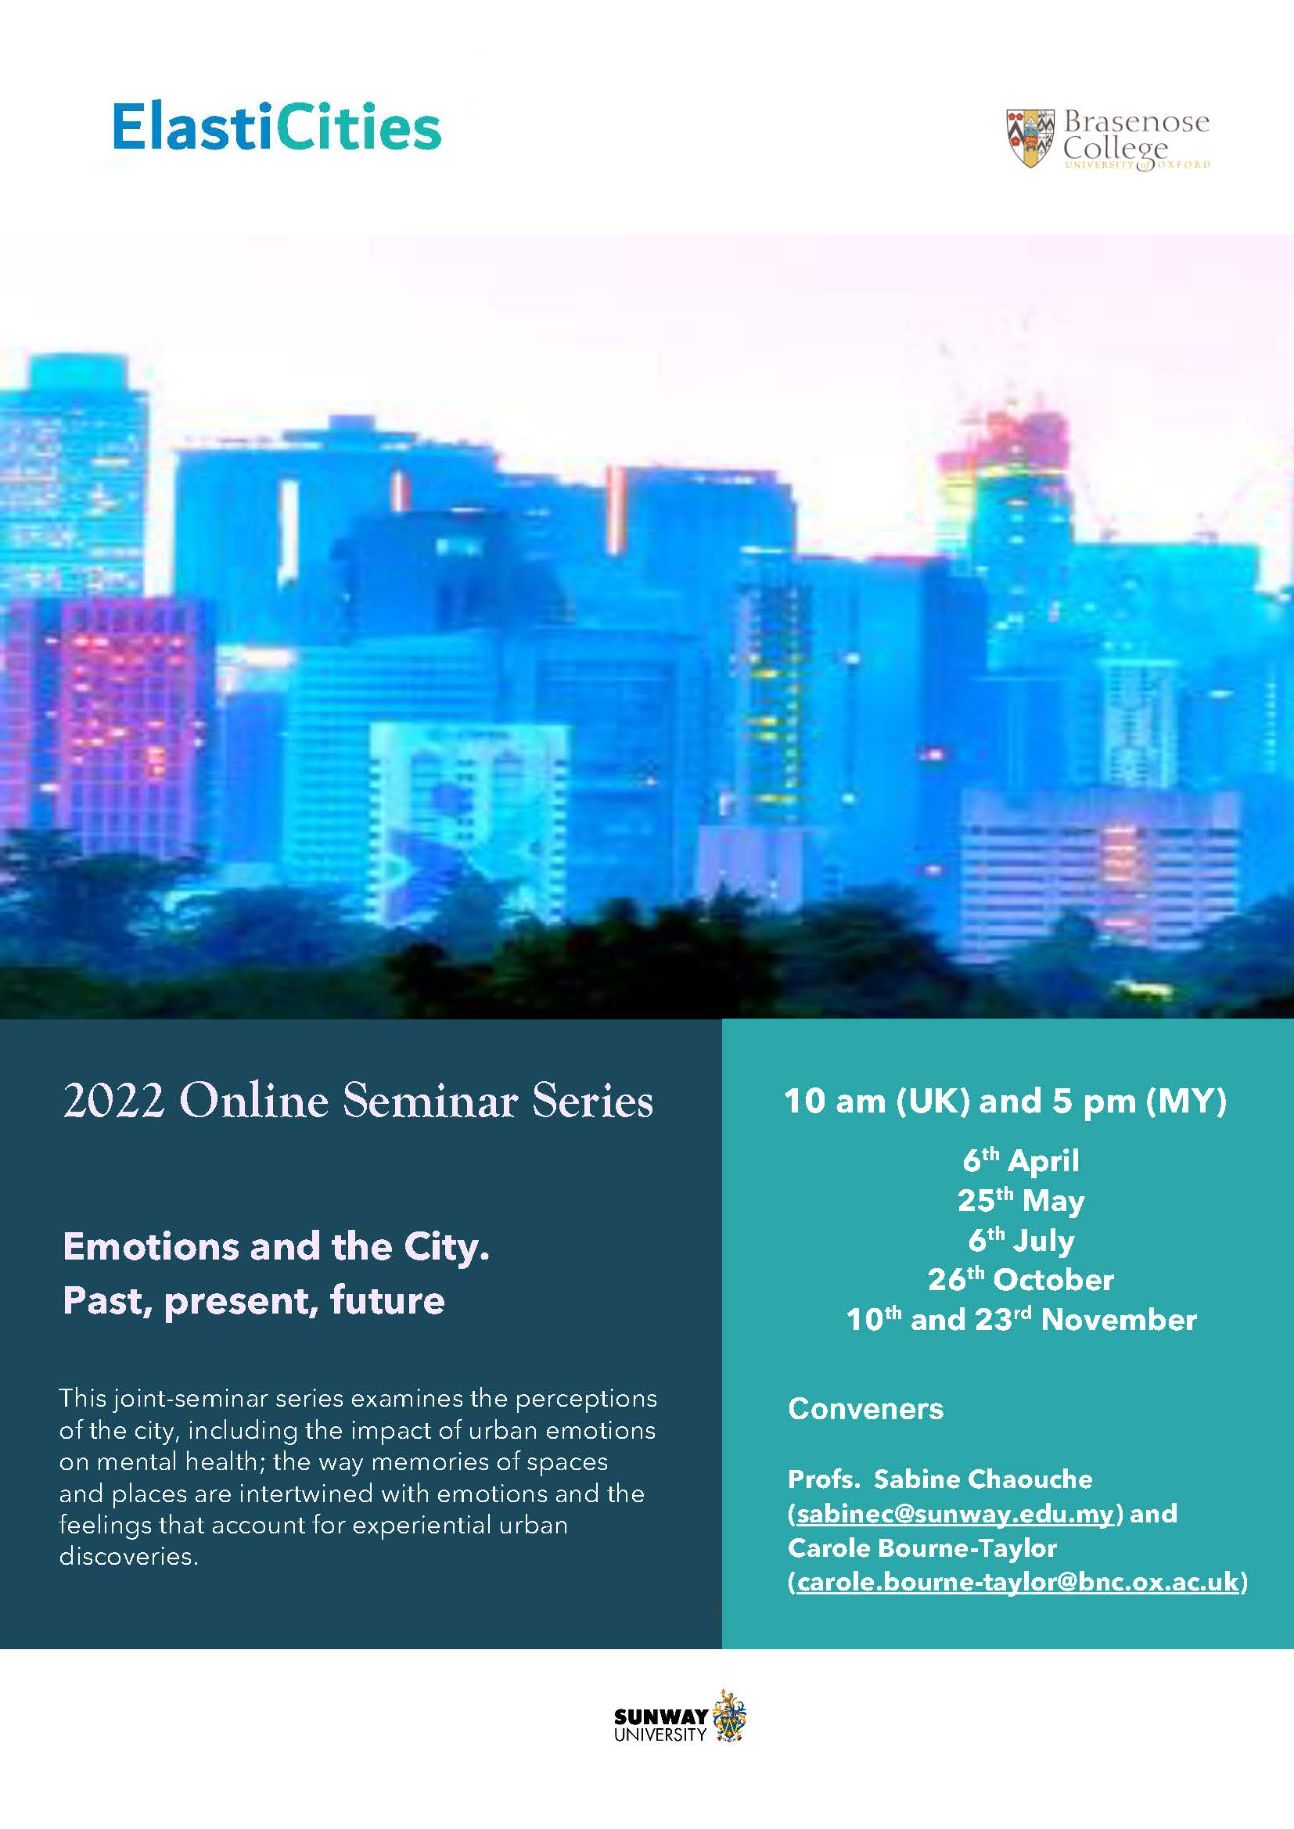 Emotions and the City. Past, Present, Future (Seminar Sunway Univ., Brasenose College, Oxford)